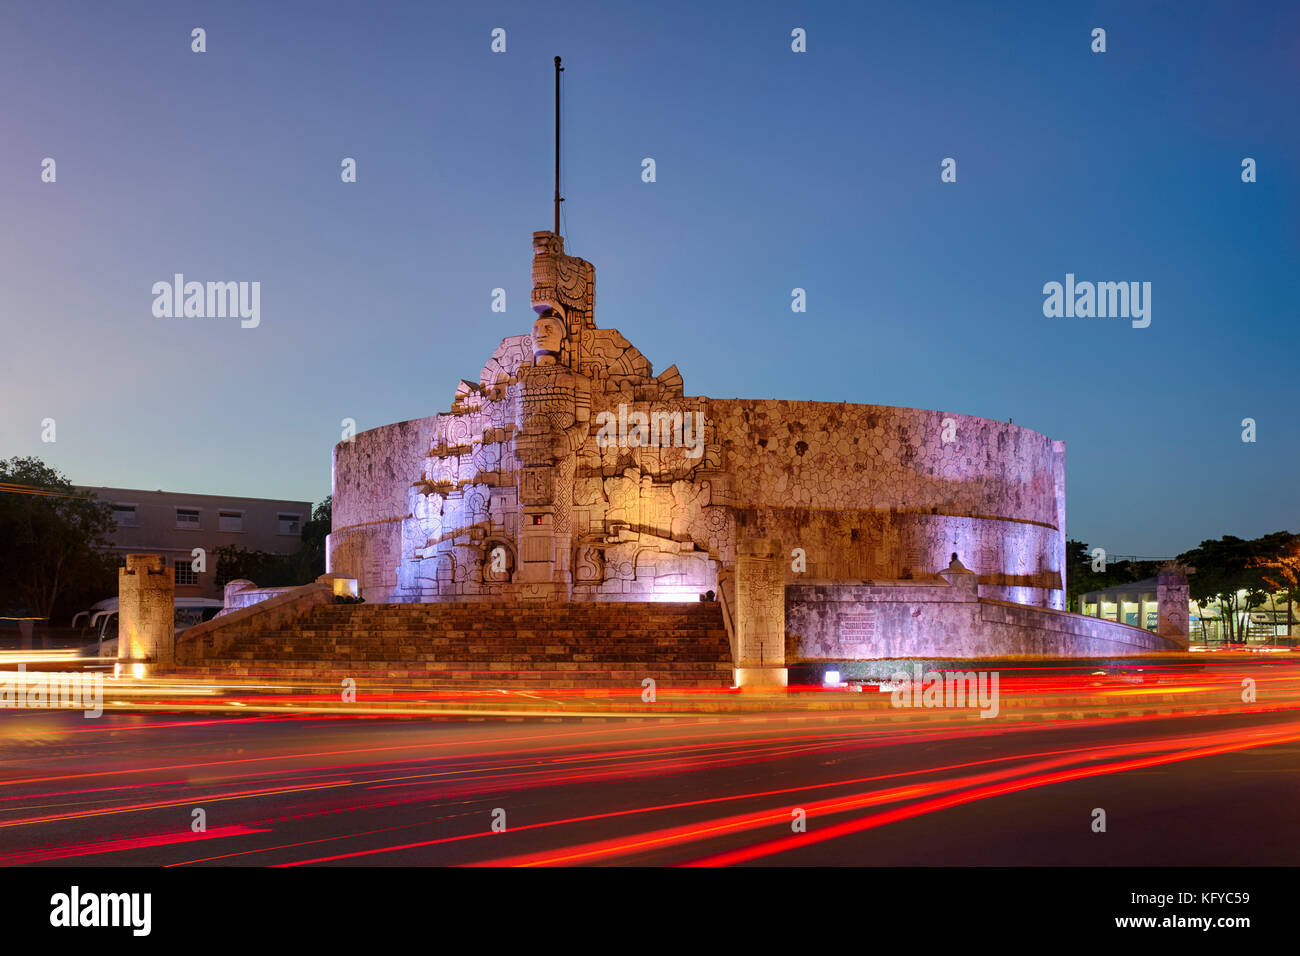 Night shot of the Monument to Motherland, Monumento a La Patria in spanish, with car light trails, in Merida, Yucatan, Mexico Stock Photo